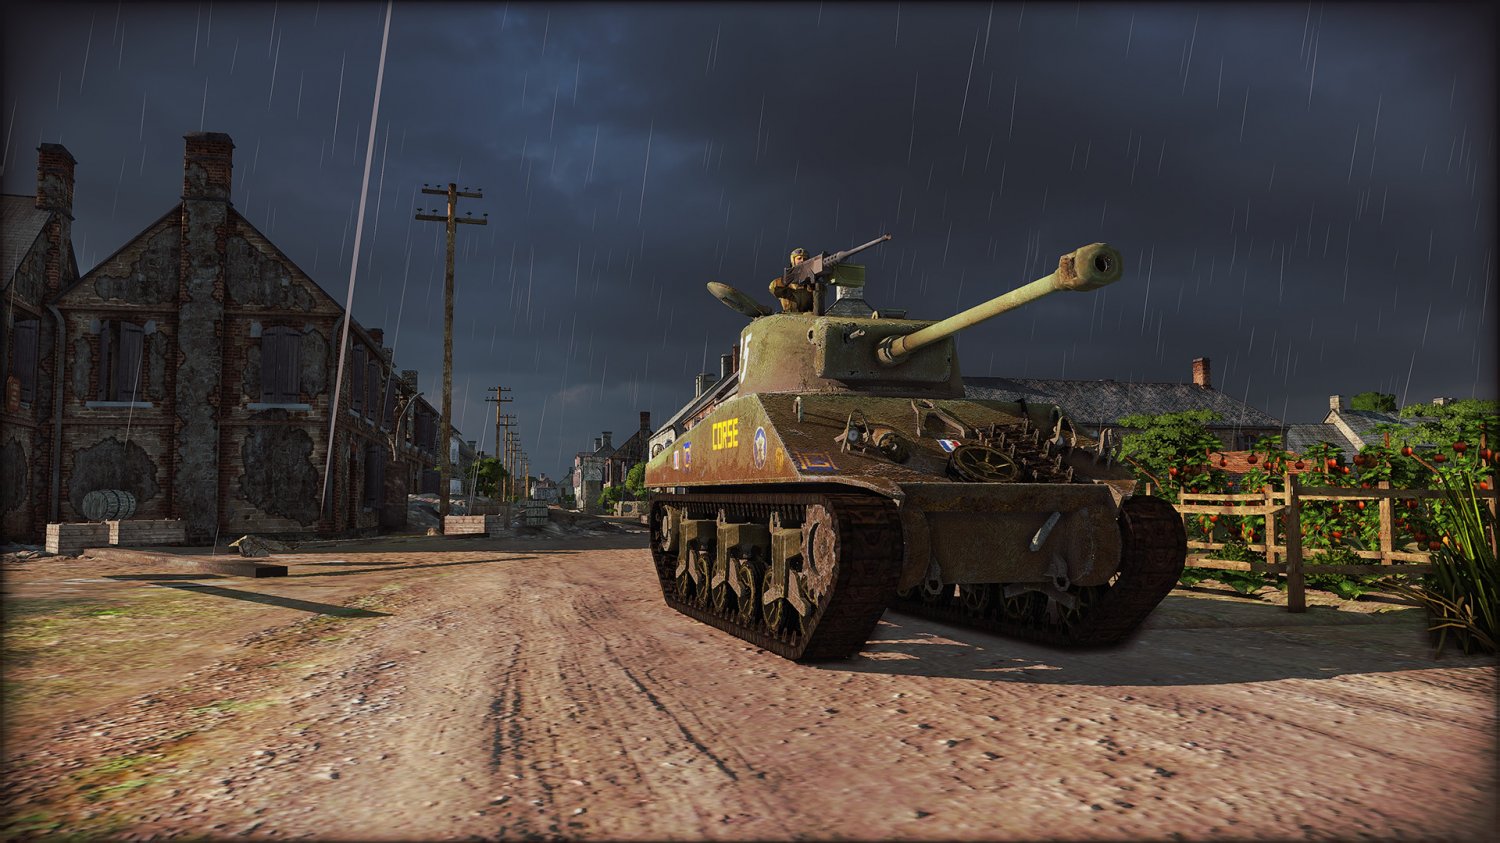 steam steel division normandy 44 download free